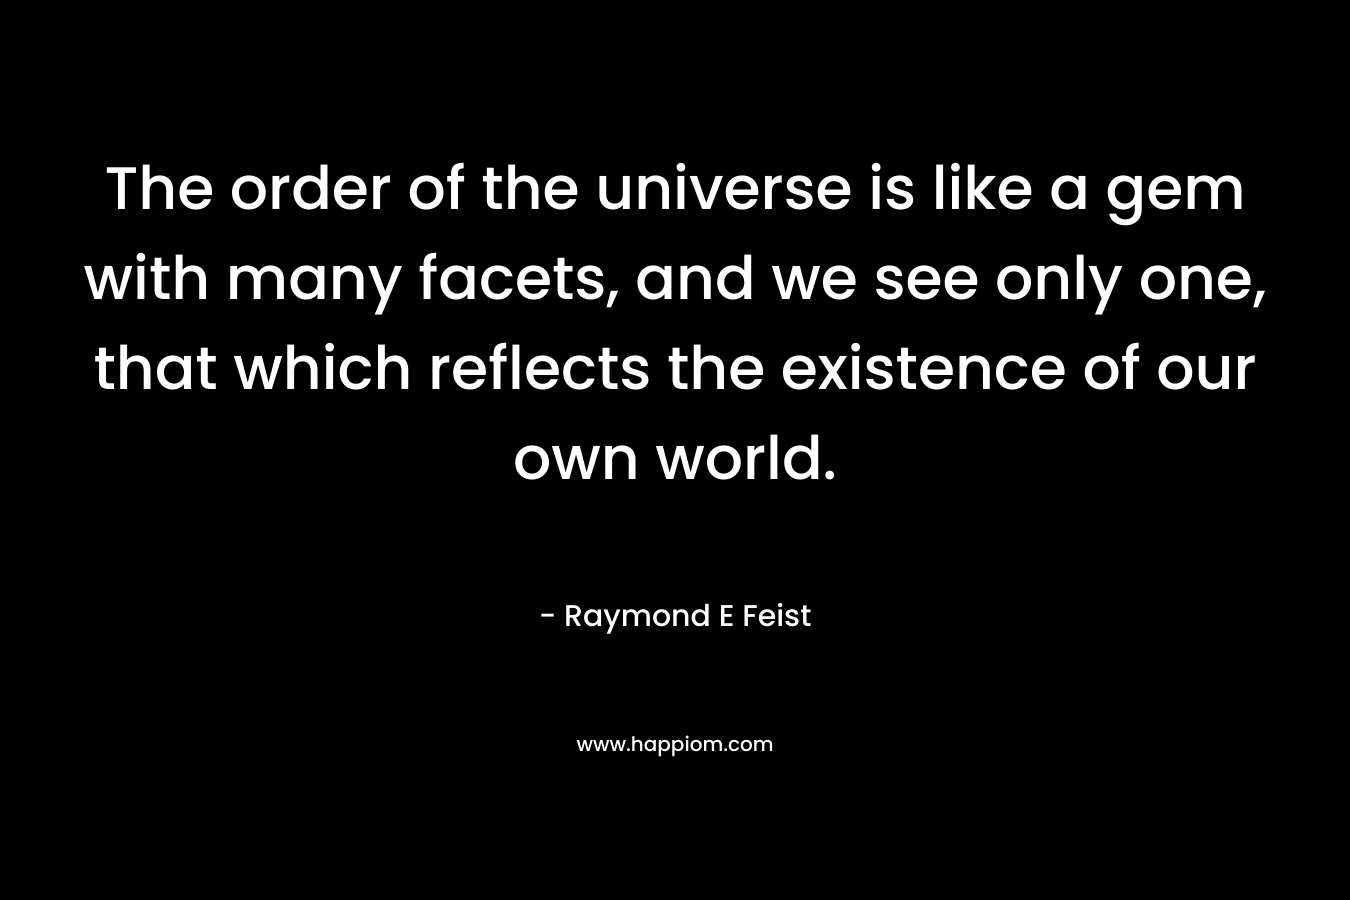 The order of the universe is like a gem with many facets, and we see only one, that which reflects the existence of our own world.